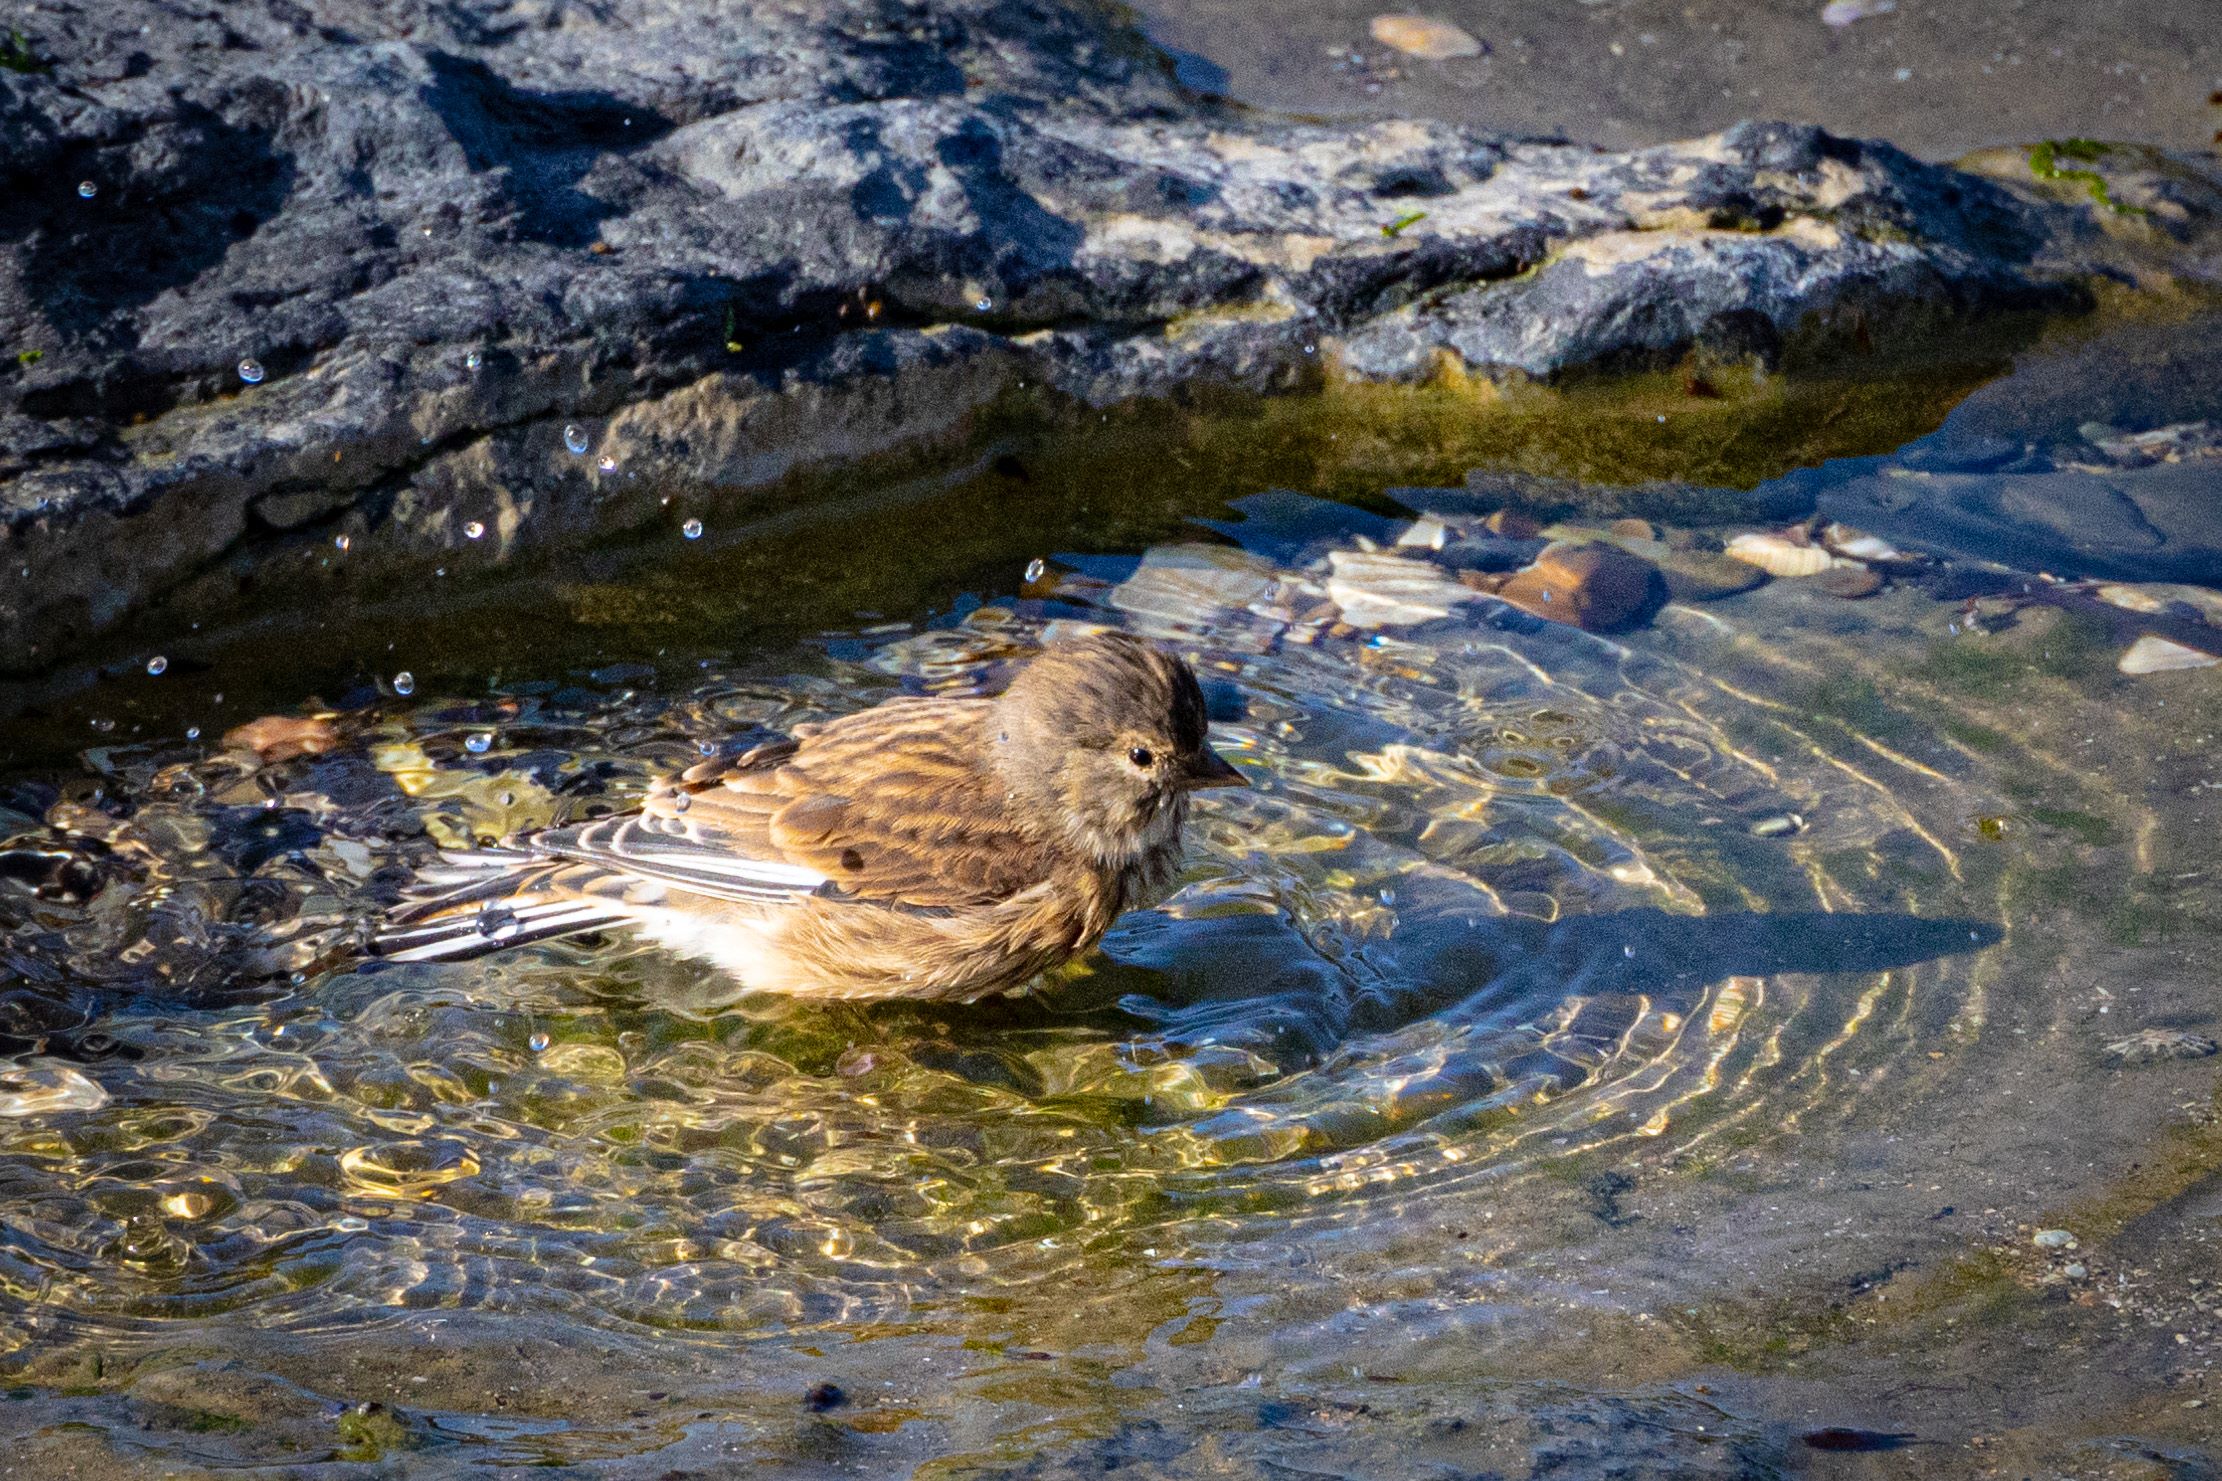 A Linnet bathes in a shallow pool